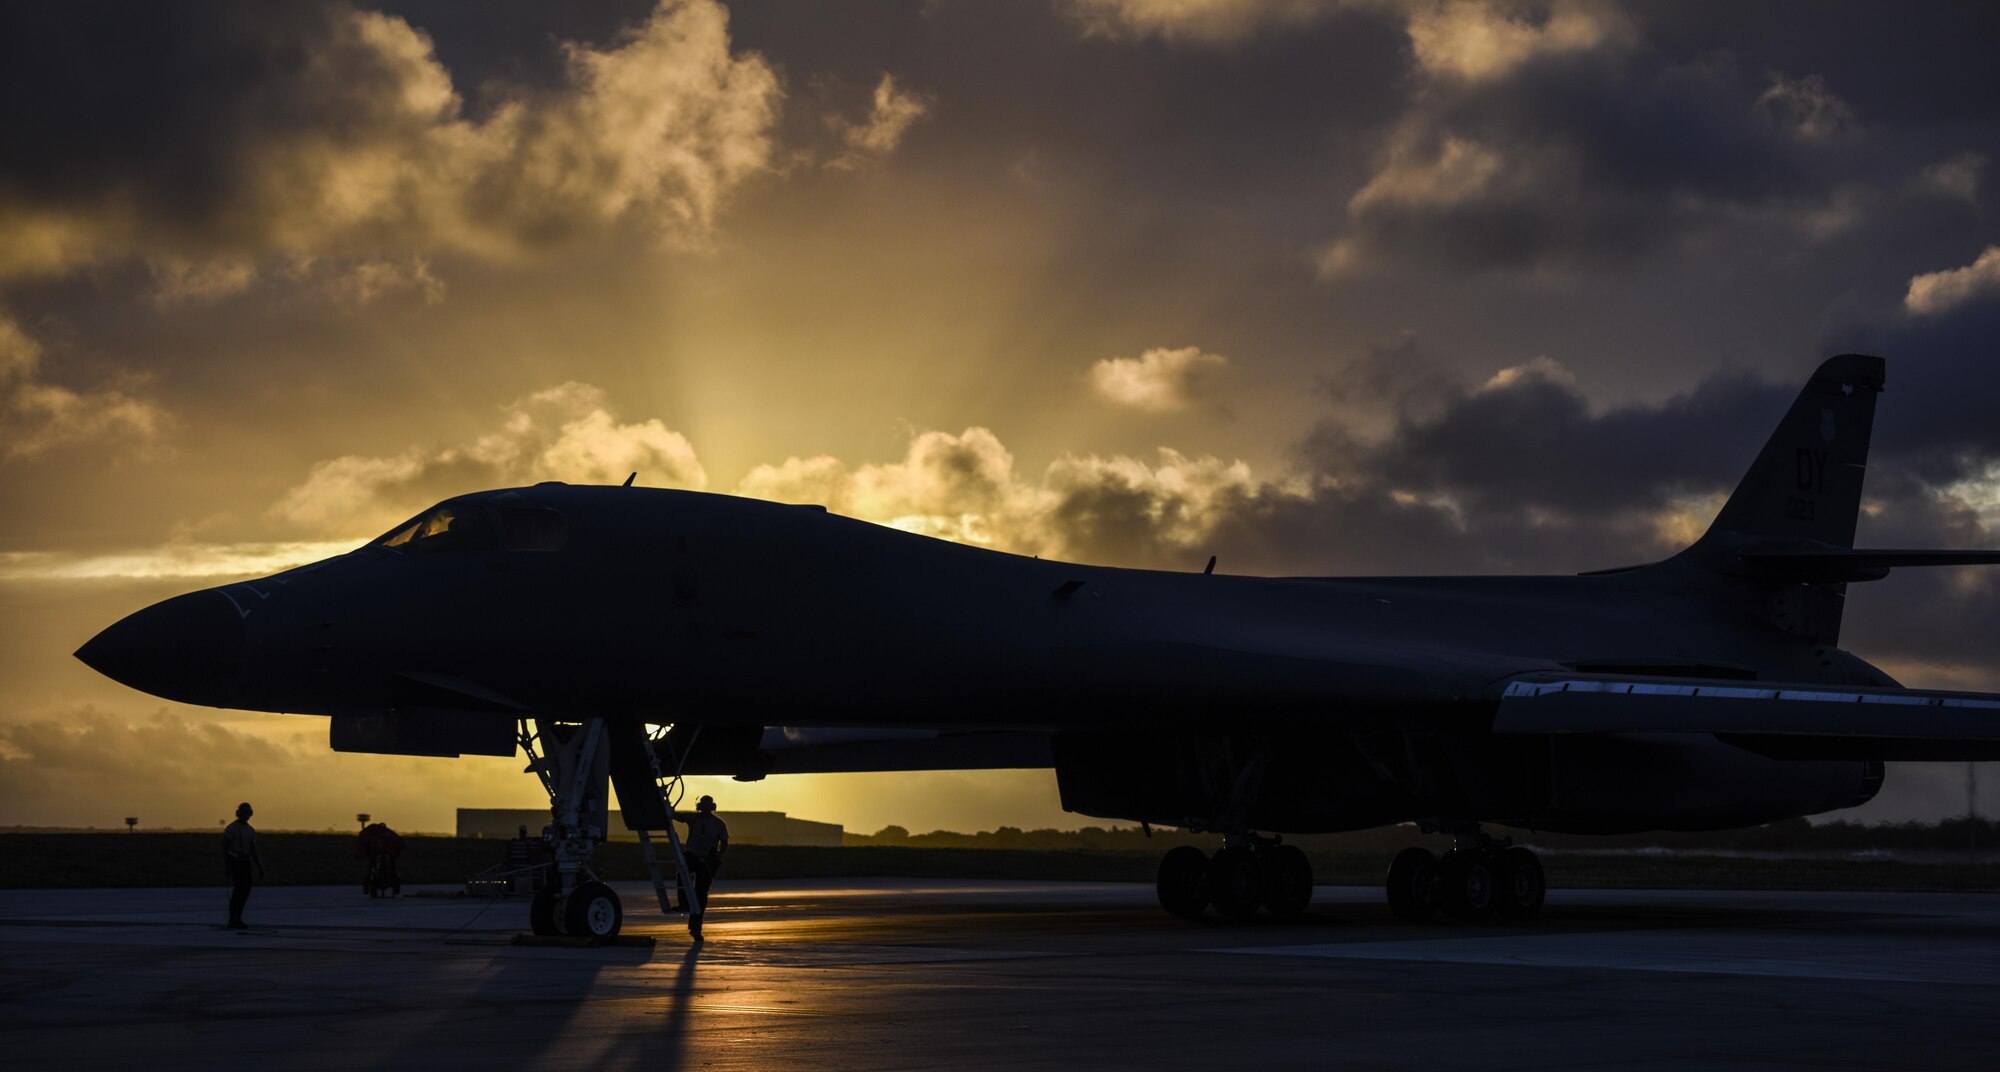 A U.S. Air Force B-1B Lancer assigned to the 9th Expeditionary Bomb Squadron, deployed from Dyess Air Force Base, Texas, prepares to take off from Andersen Air Force Base, Guam, to fly a bilateral mission with two Japan Air Self-Defense Force F-15’s over the East China Sea, July 6, 2017. Bilateral training fosters increased interoperability between Japan and U.S. aircraft. Participating in bilateral training enables the operational units to improve their combined capabilities and tactical skills, while also building bilateral confidence and strong working relationships. (U.S. Air Force photo/Tech. Sgt. Richard P. Ebensberger)